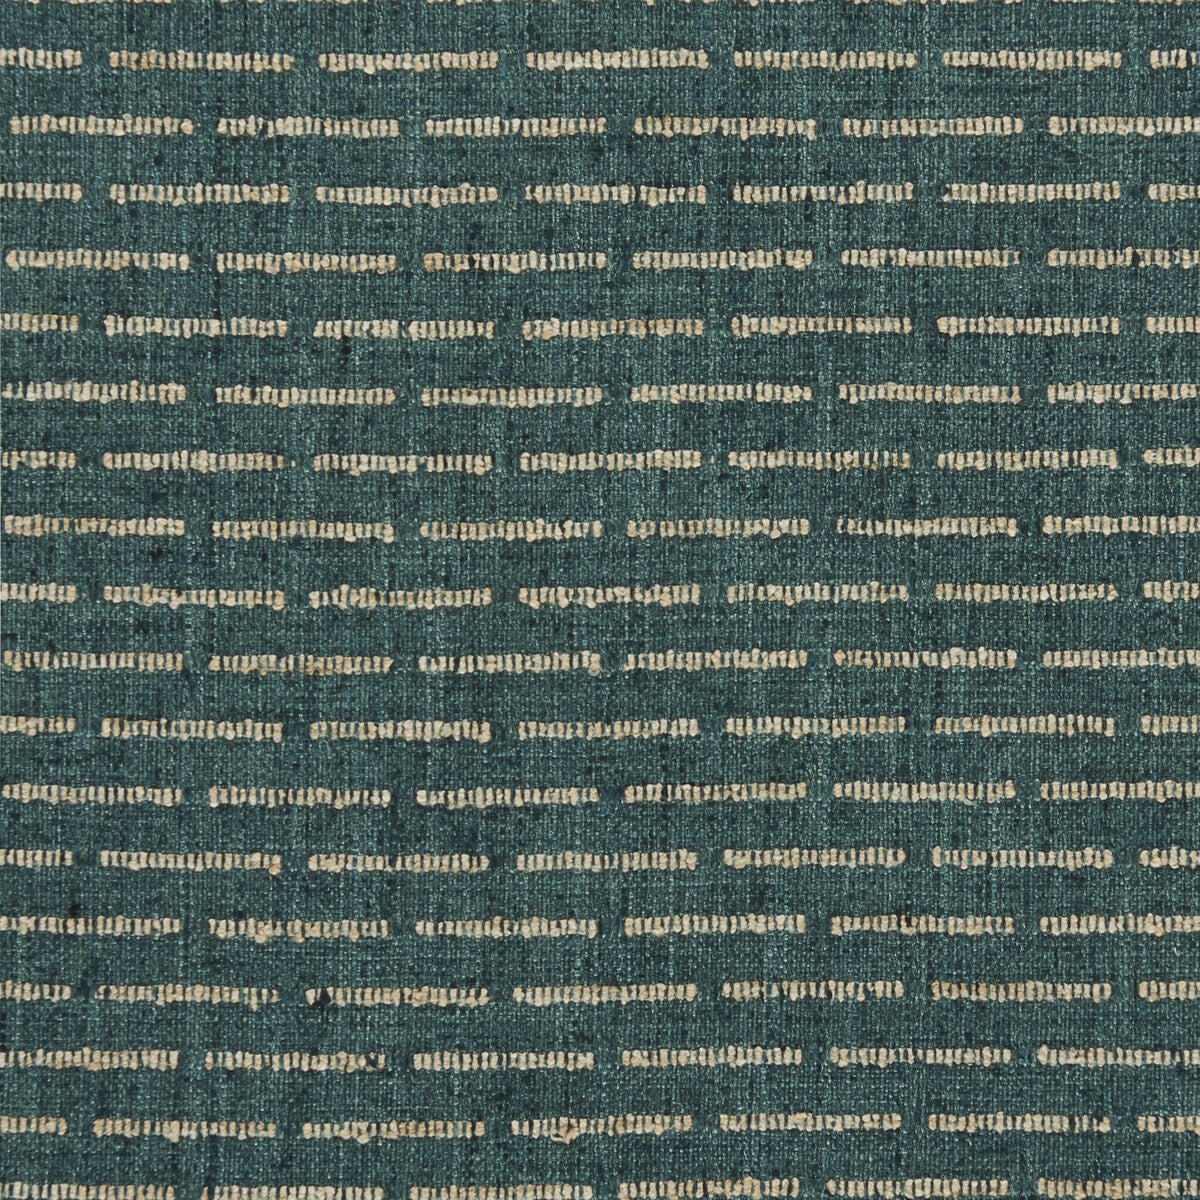 Kravet Basics fabric in 36528-316 color - pattern 36528.316.0 - by Kravet Basics in the Bungalow Chic II collection